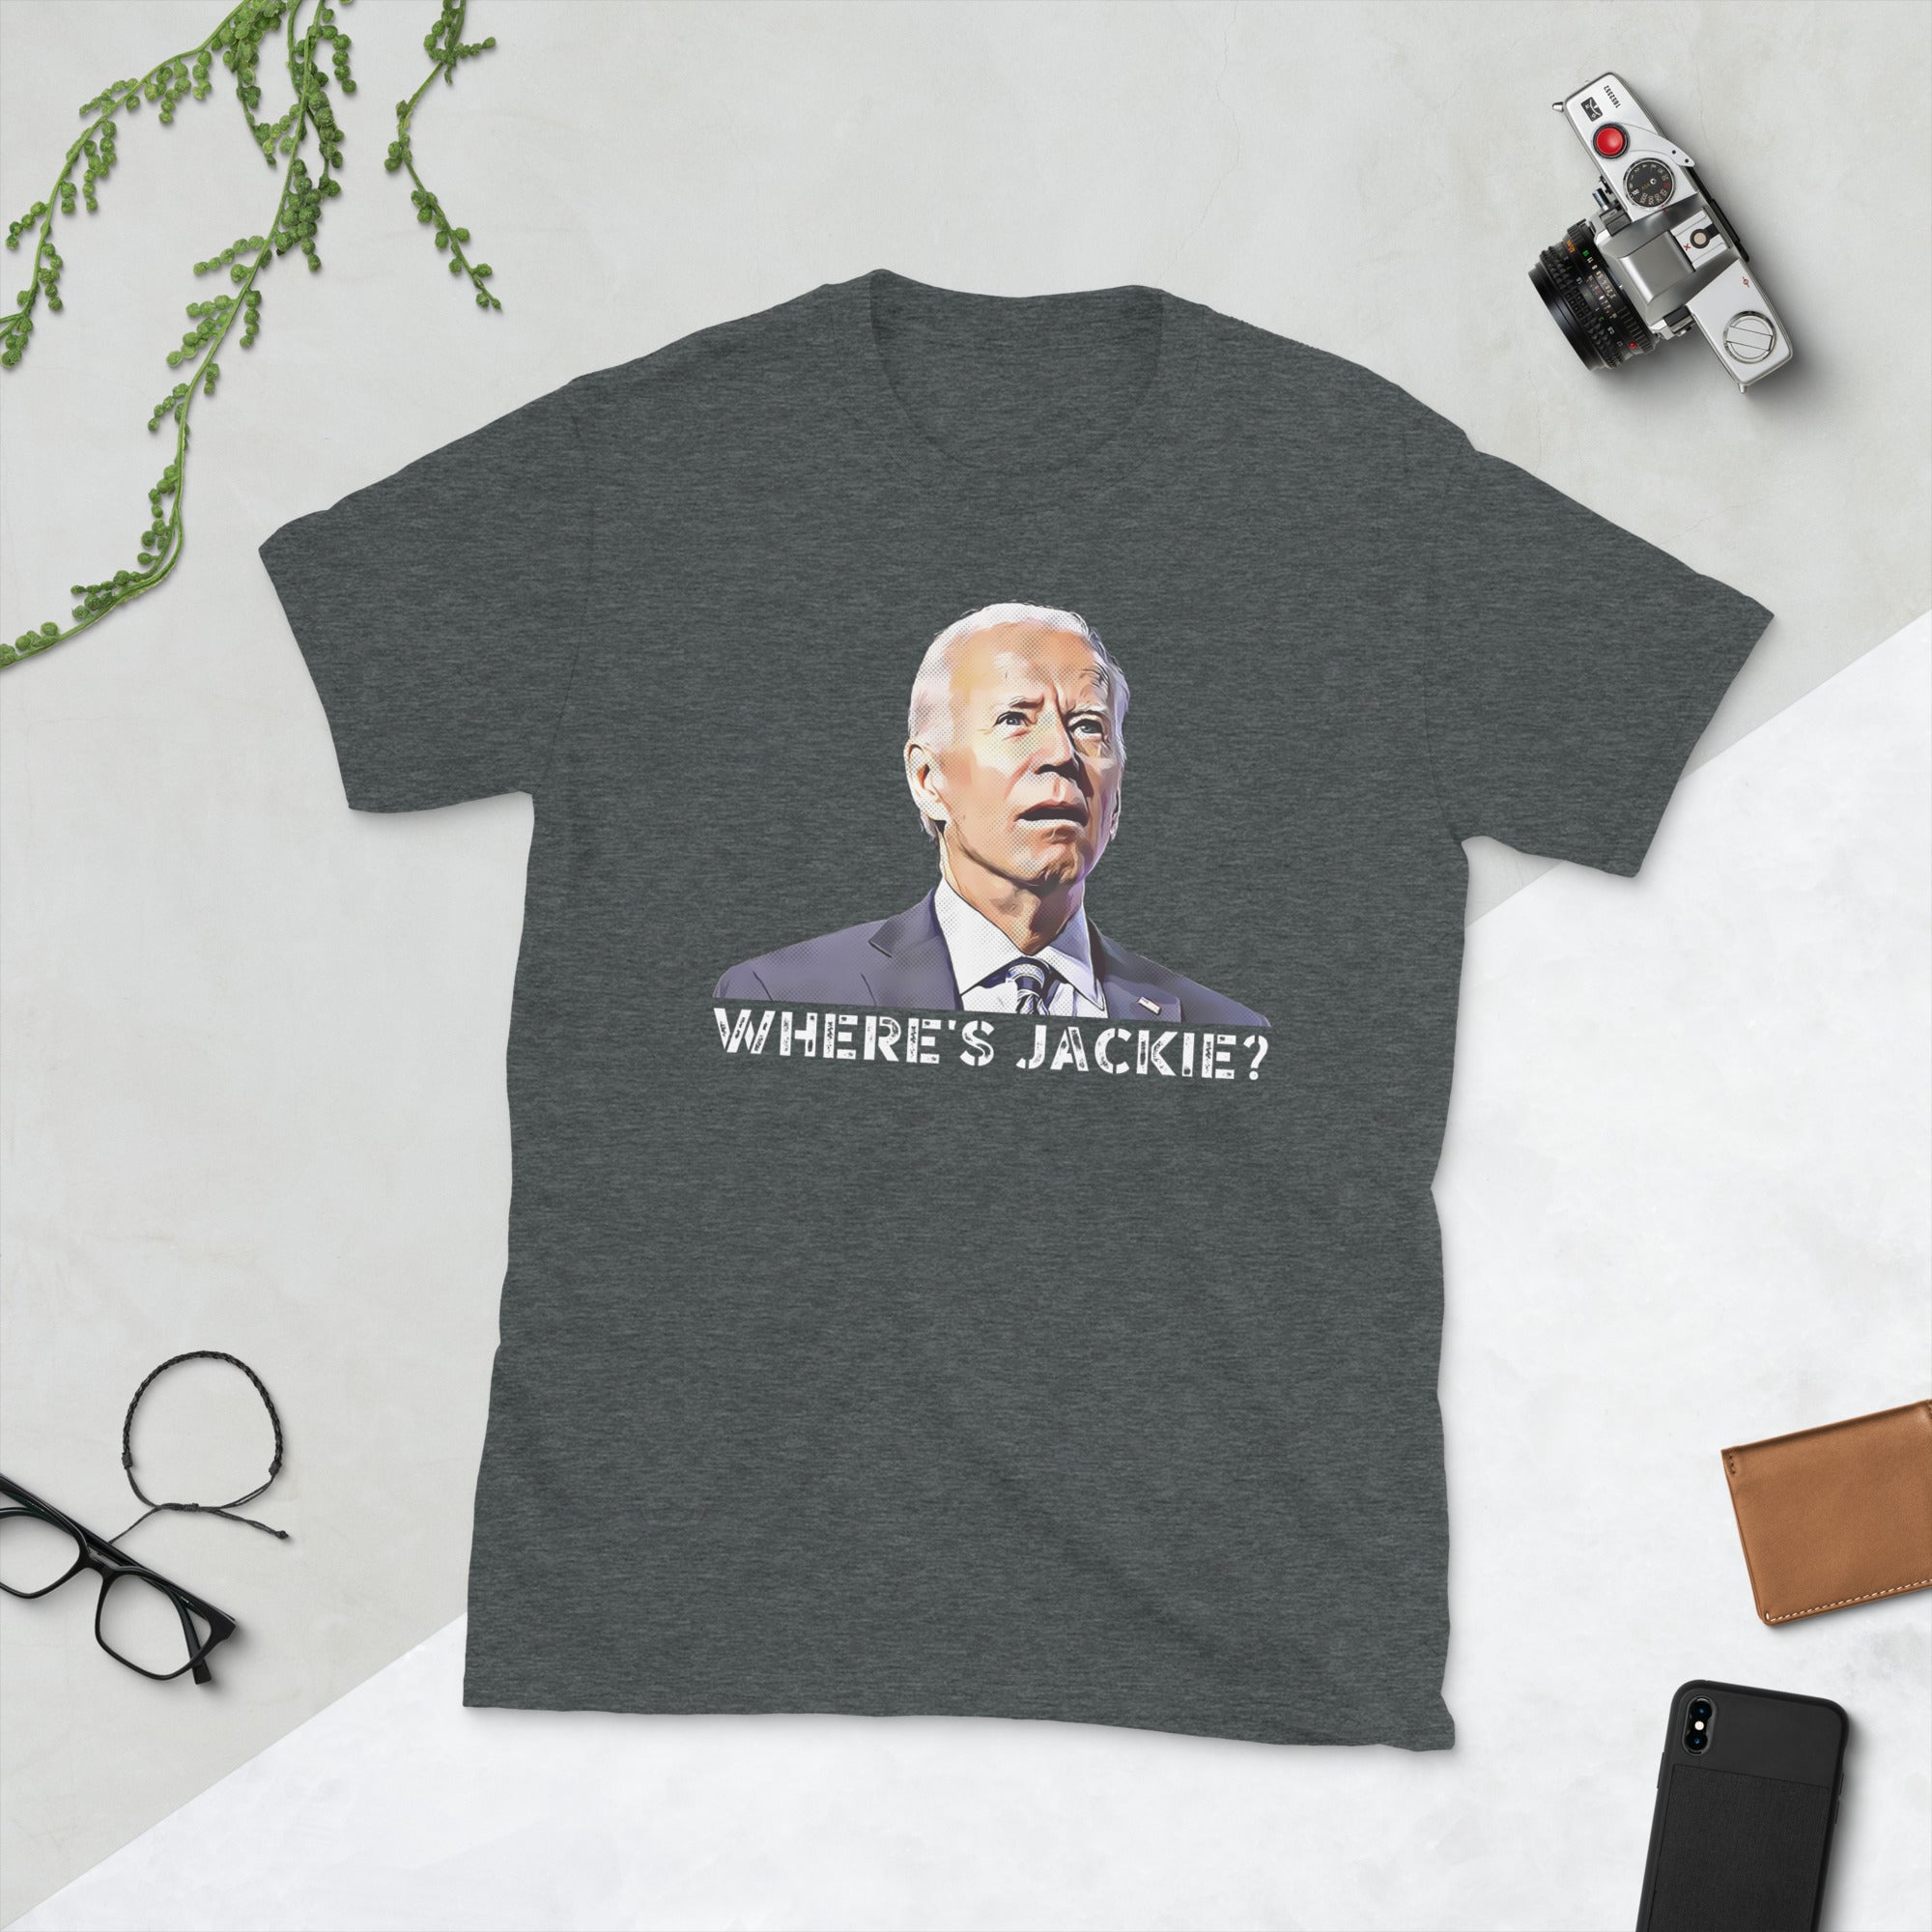 Wheres Jackie Funny Anti Biden Shirt, Where is Jackie, Jackie Are You Here Biden Tshirt, Joe Biden Confused, Republican Shirt, FJB T Shirt - Madeinsea©